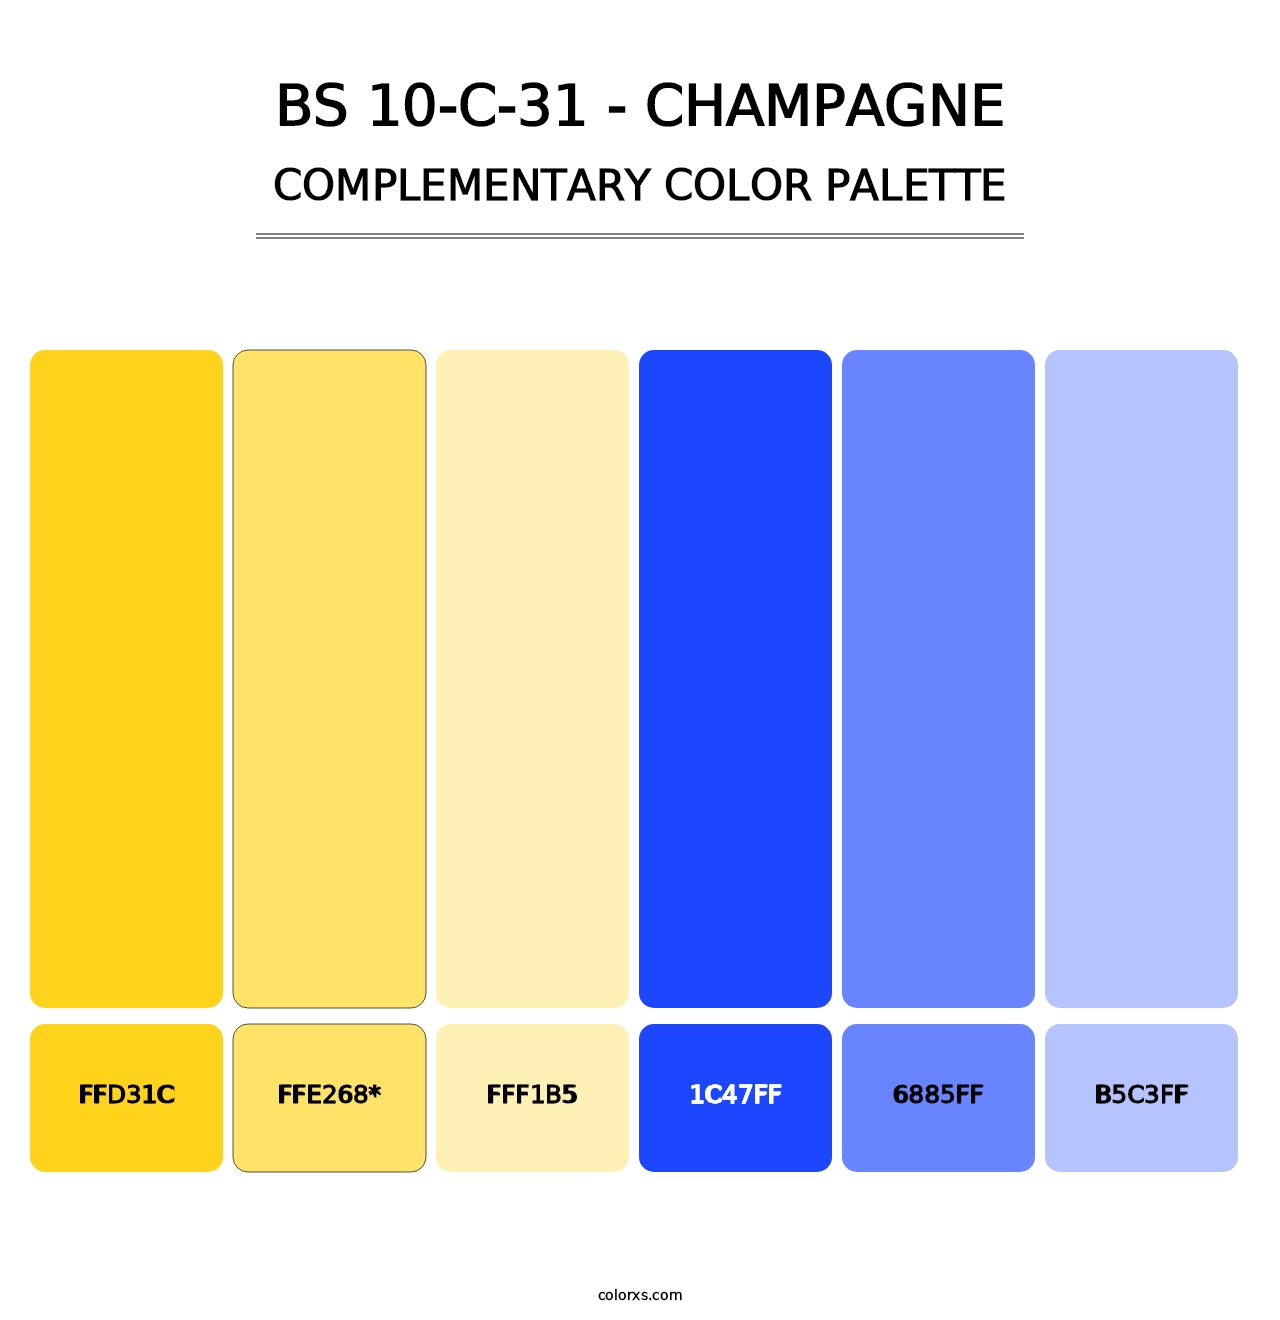 BS 10-C-31 - Champagne - Complementary Color Palette